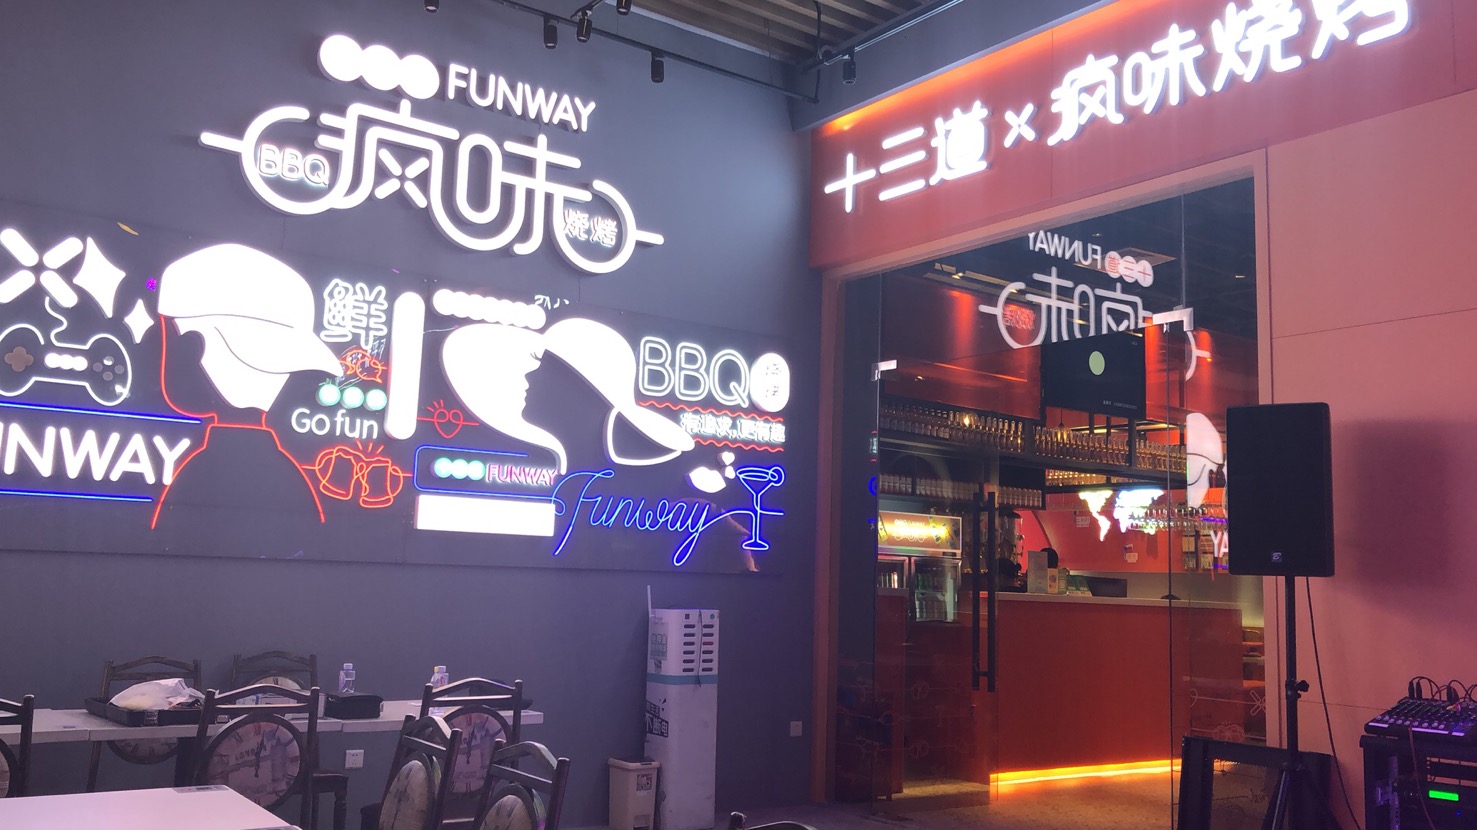 Thirteen crazy flavor barbecue bar (Foshan Tianhe City store) Sound Project